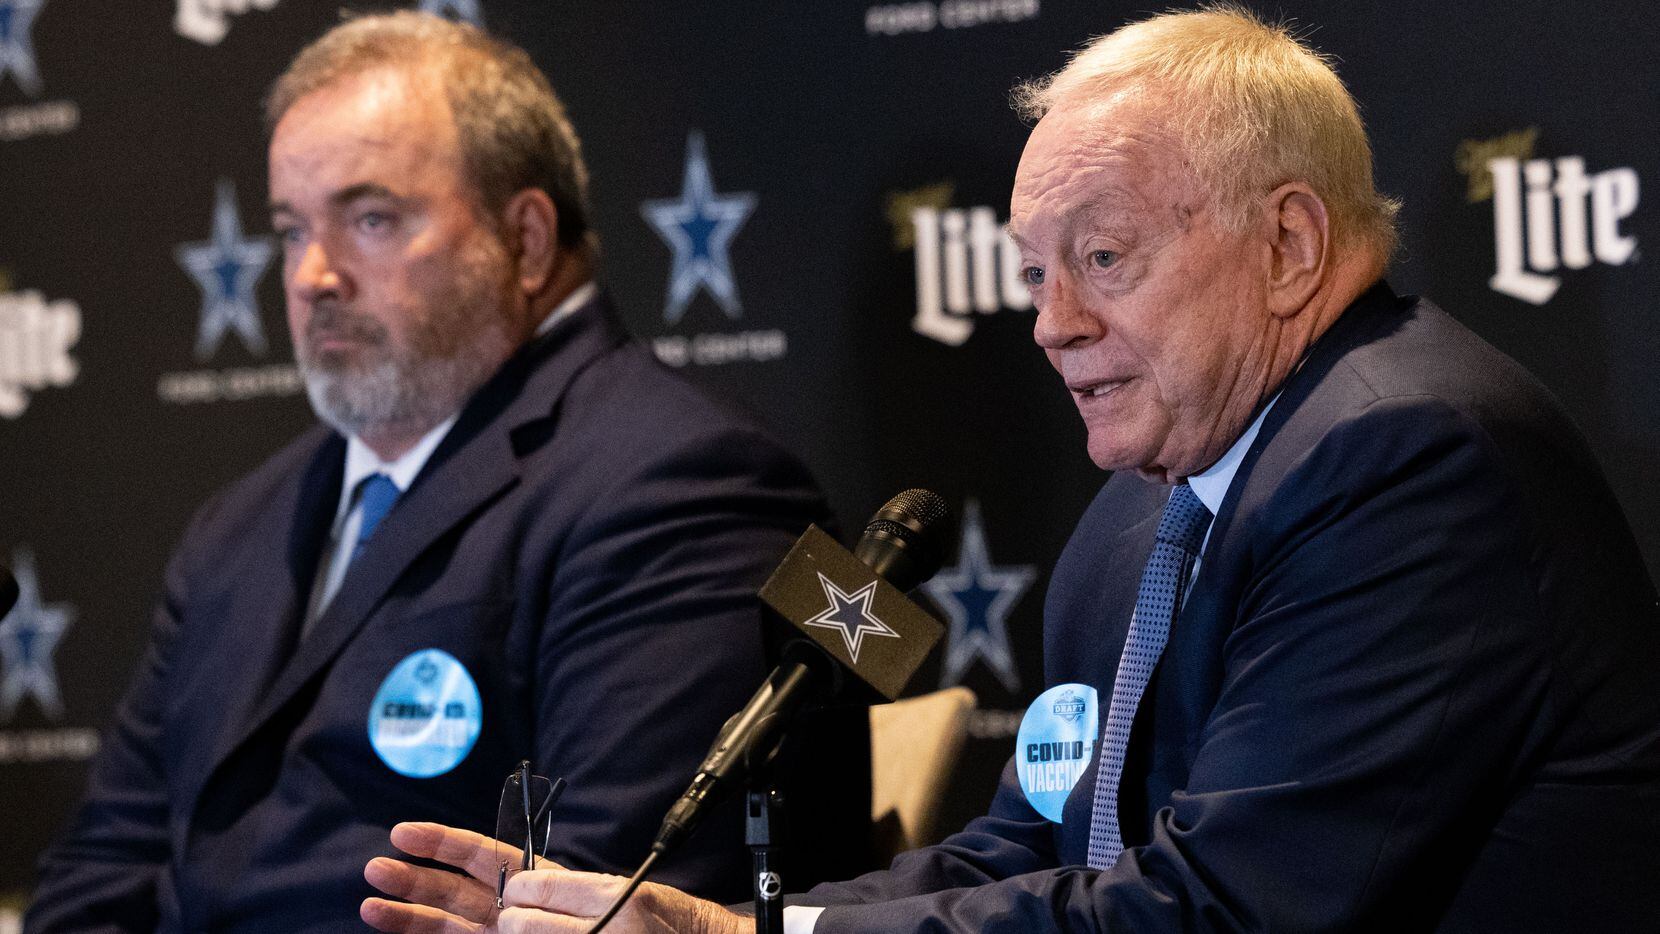 (From left) Coach Mike McCarthy and Dallas Cowboys owner Jerry Jones speak at a press conference following their decision to take Micah Parsons during the NFL draft at the Star on Thursday, April 29, 2021, in Frisco.